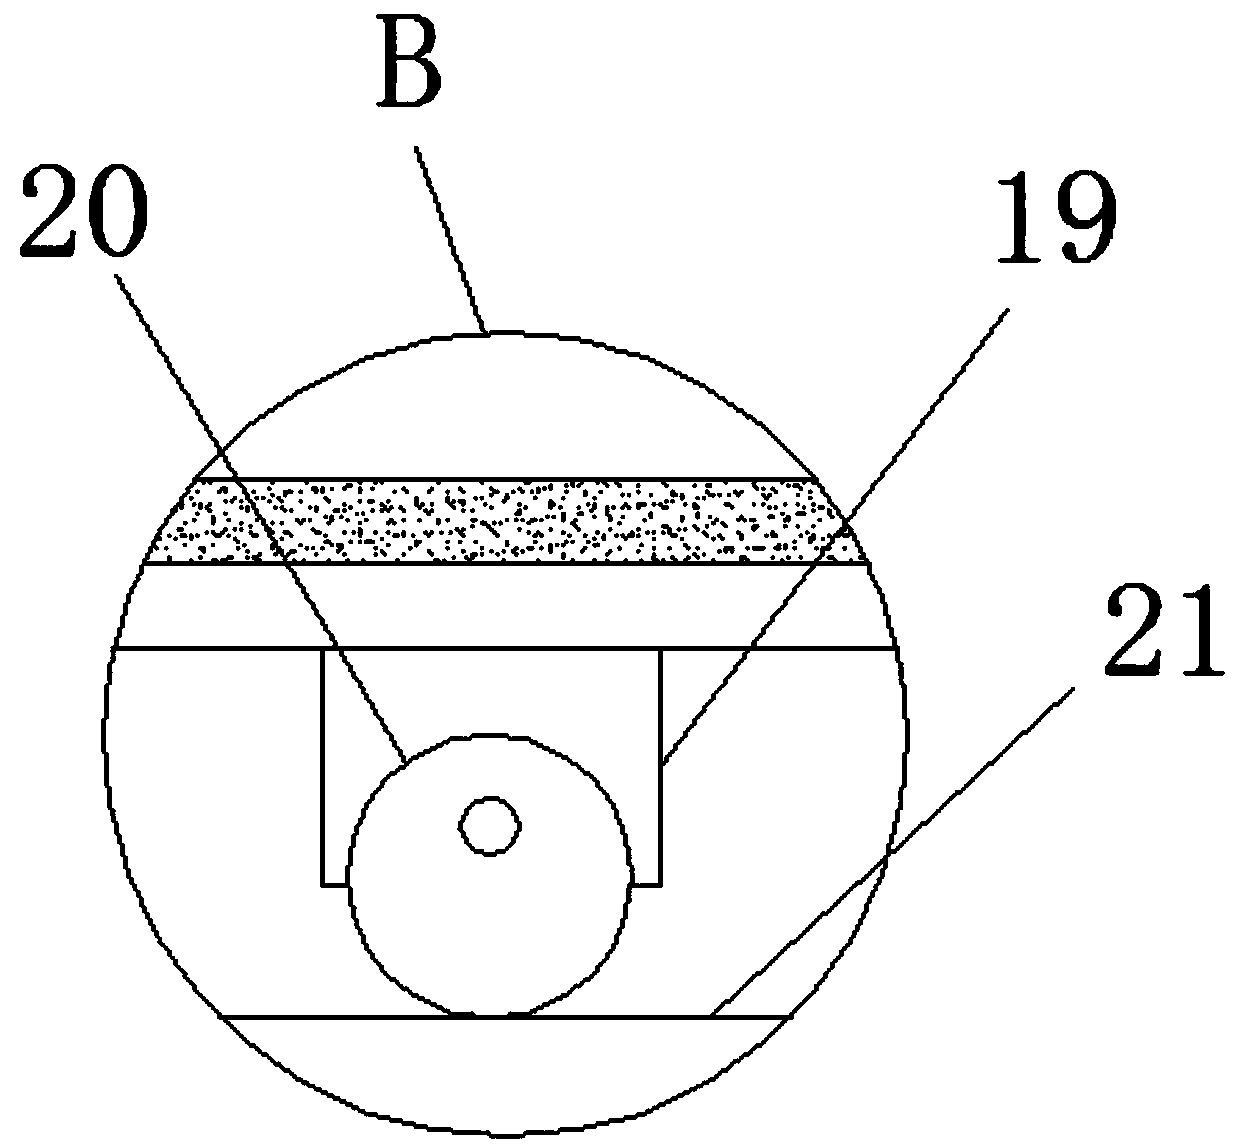 Drying device for cotton cloth processing